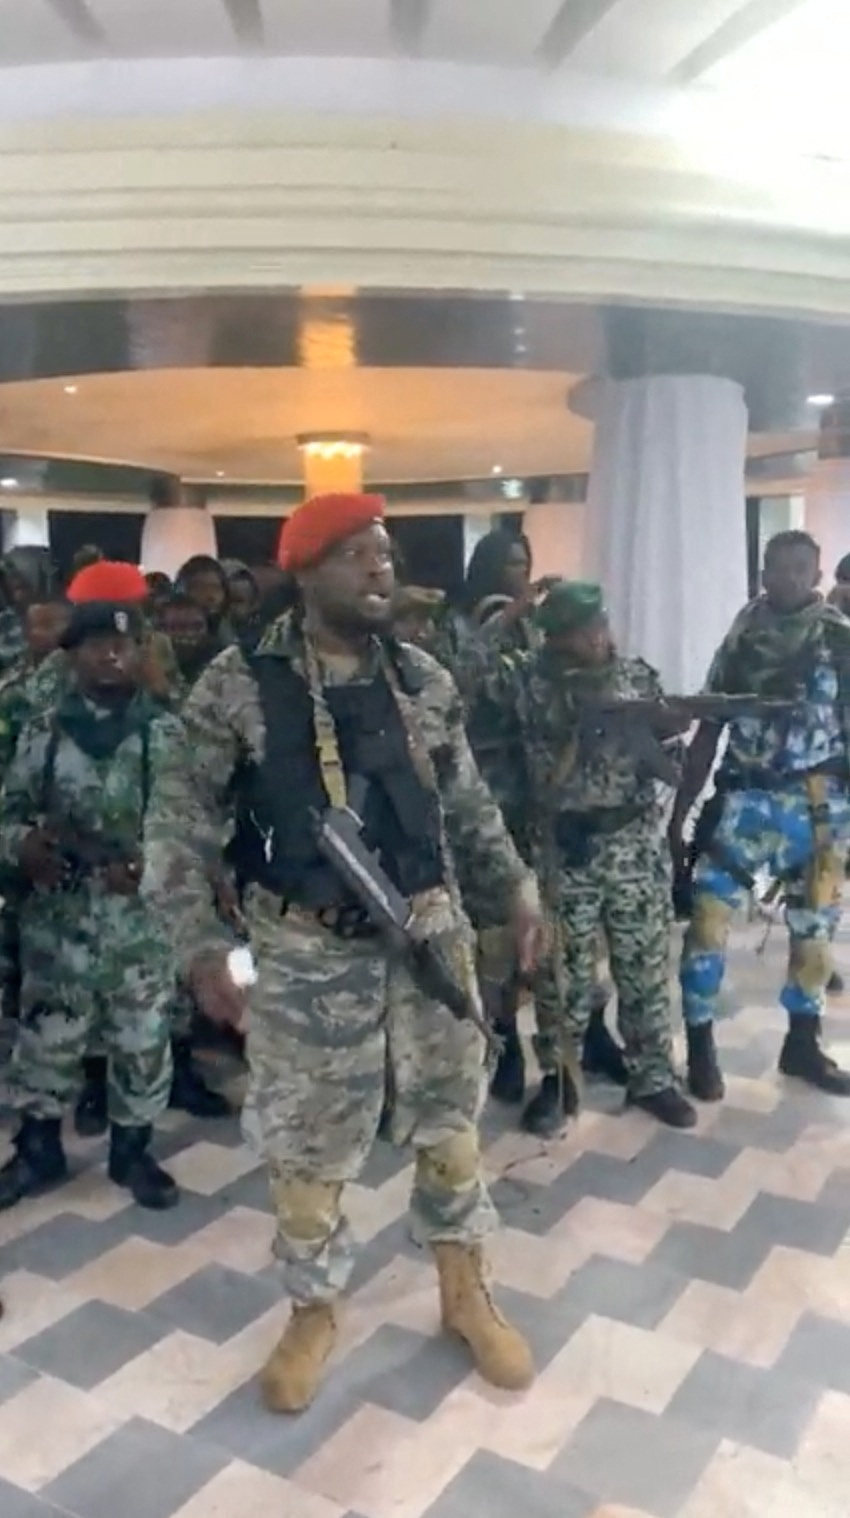 Men in military fatigues inside the Palace of the Nation during an attempted coup in Kinshasa, Democratic Republic of Congo on Sunday, in a screen grab from a social media video. Photo: Christian Malanga / Handout via Reuters